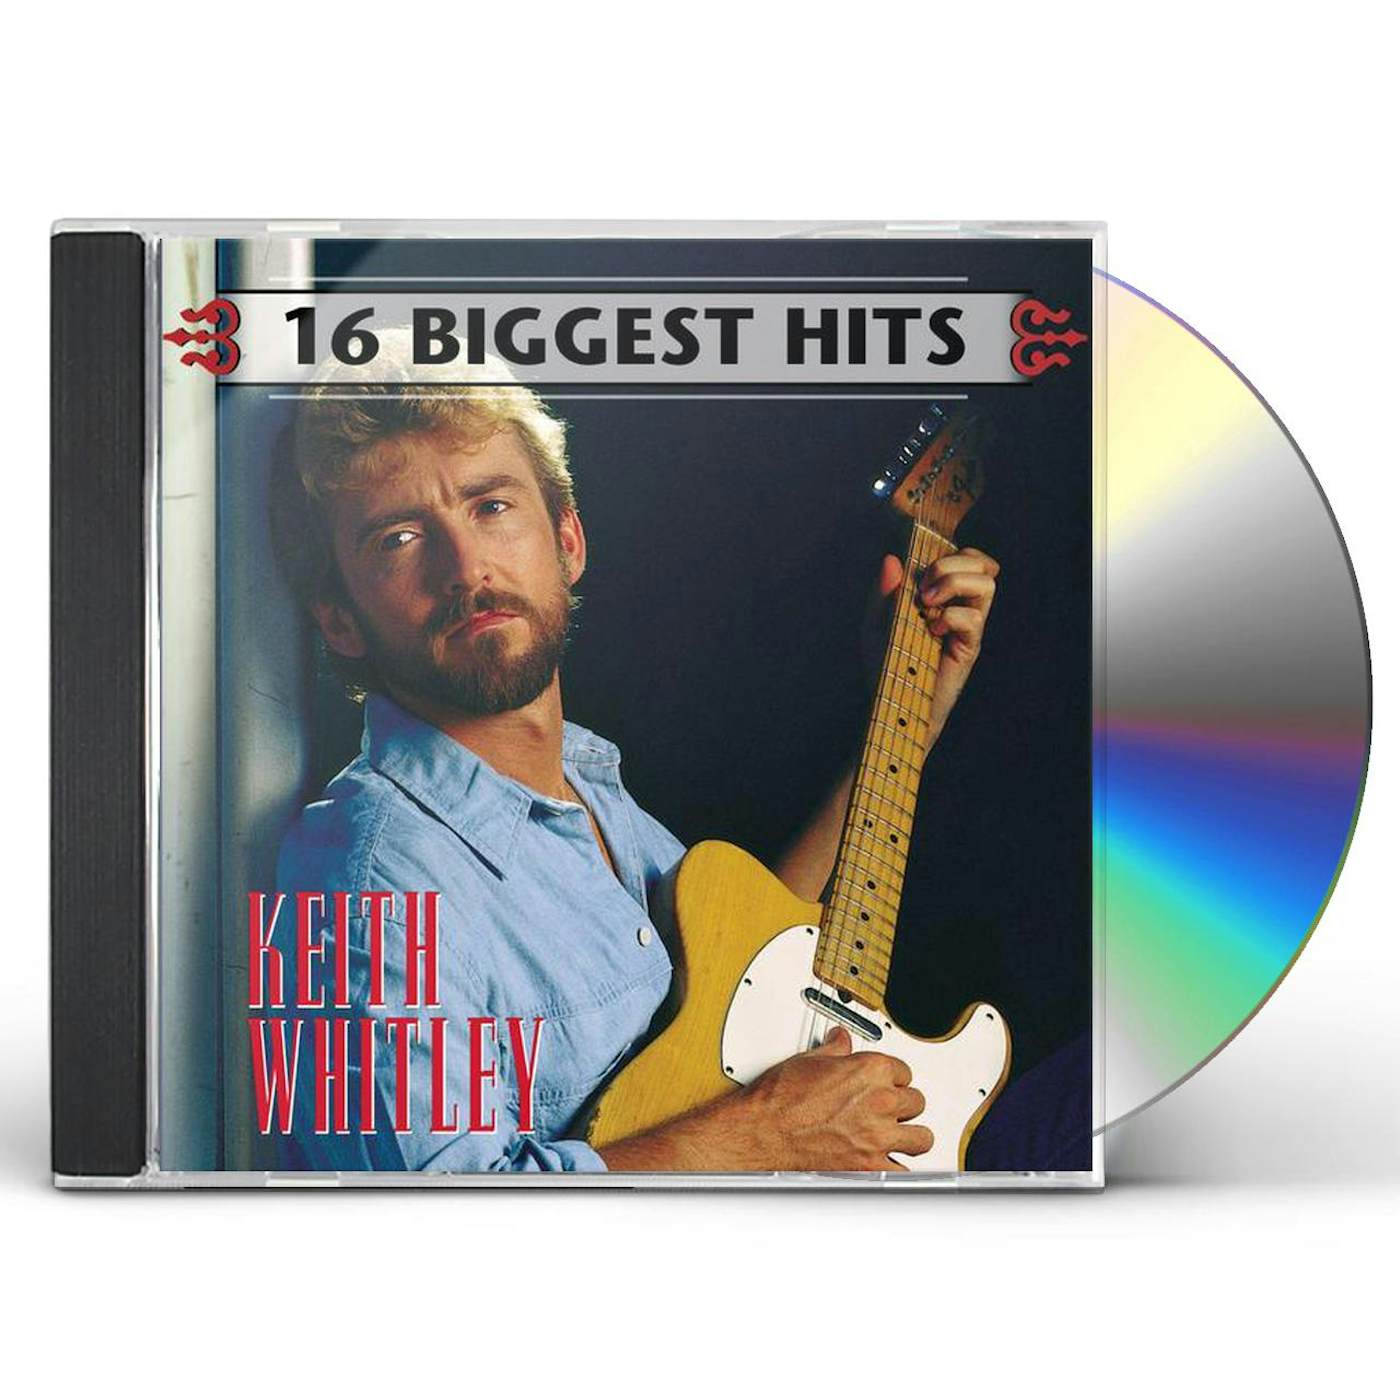 Keith Whitley 16 BIGGEST HITS CD